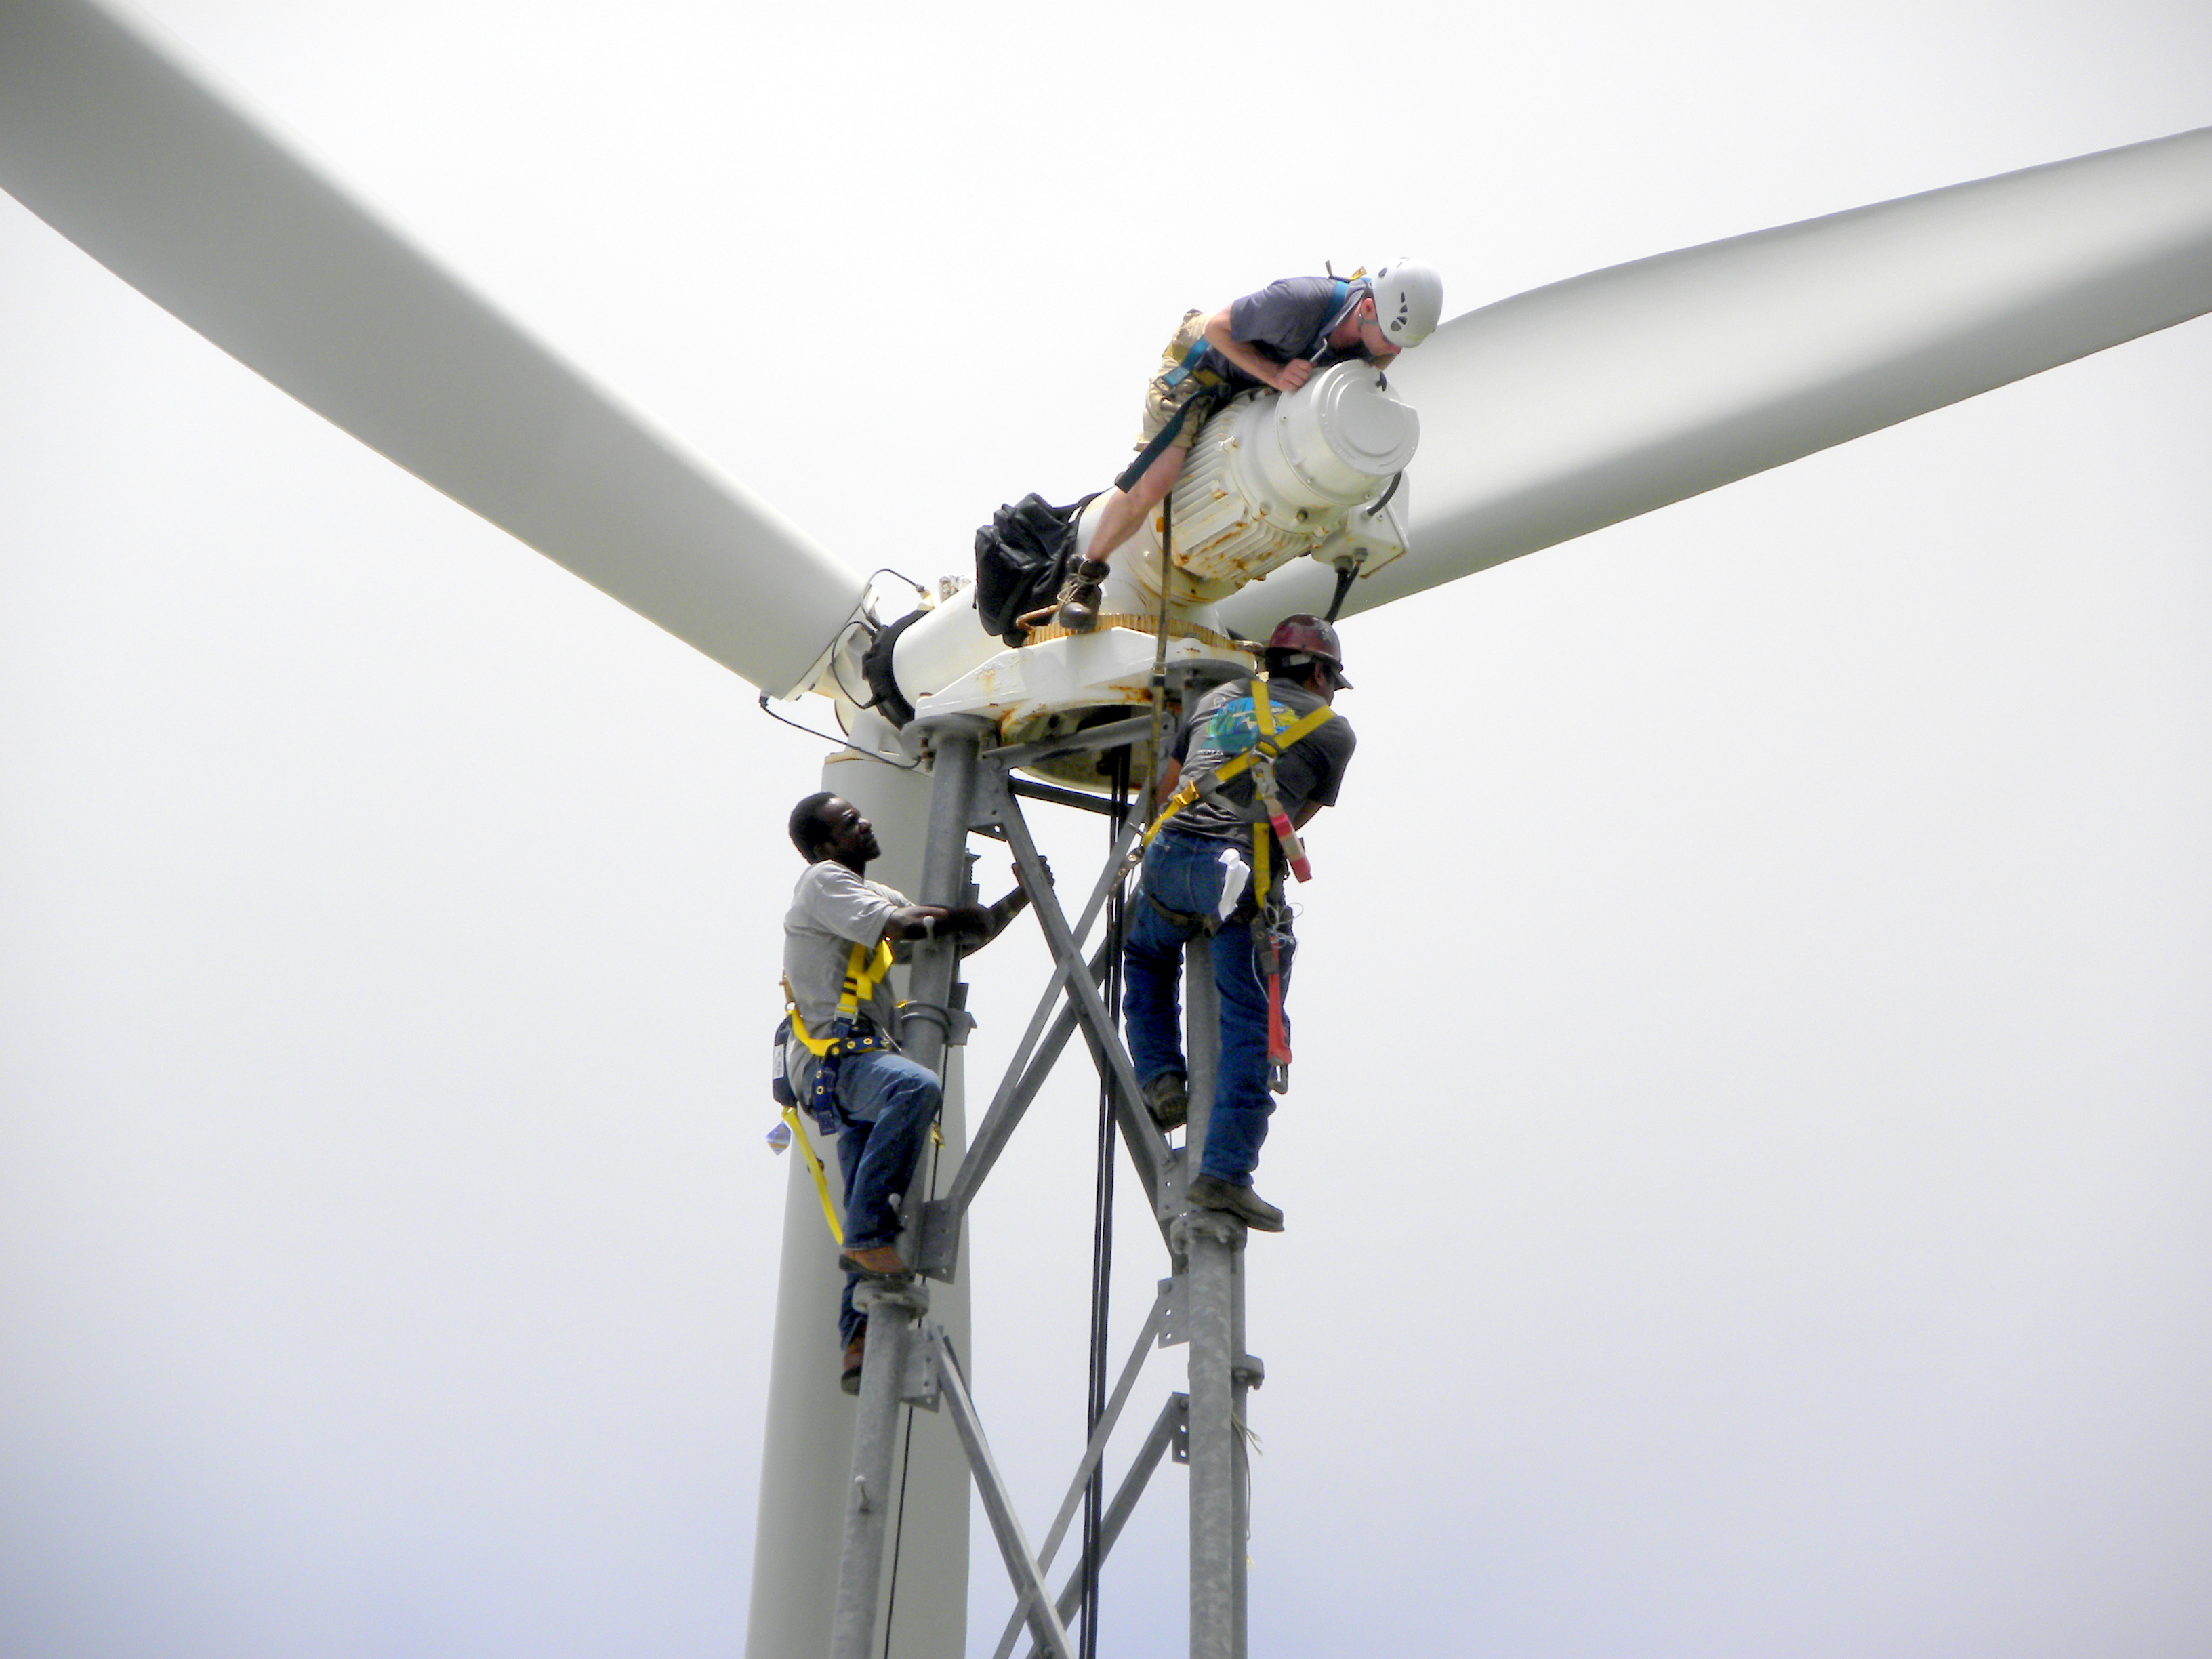 Engineers and technician examine turbine equipment prior to spin-up.